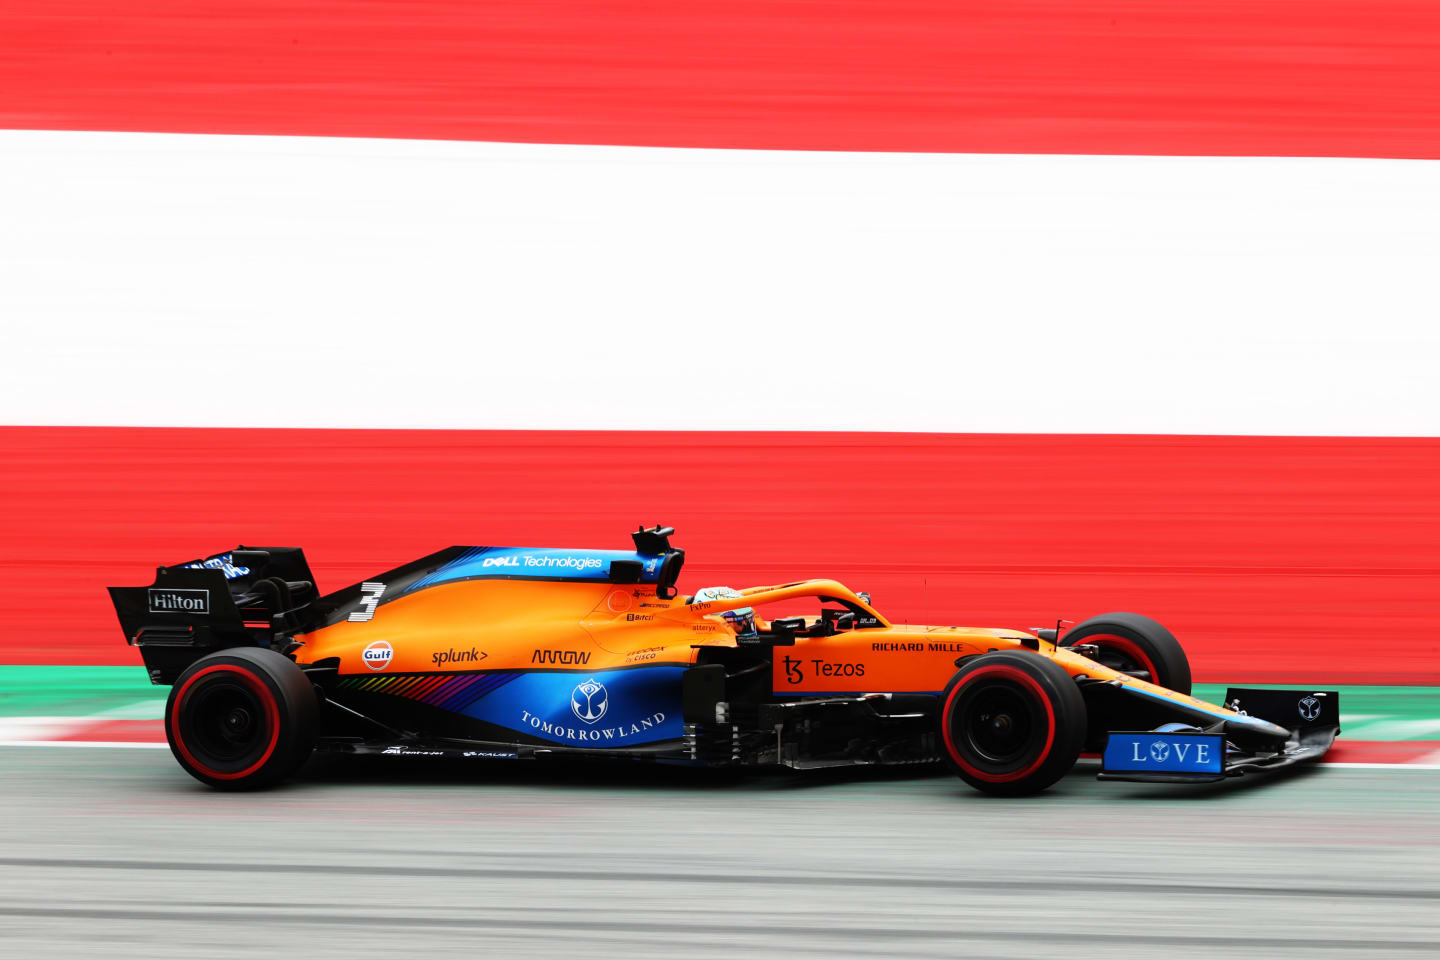 SPIELBERG, AUSTRIA - JULY 02: Daniel Ricciardo of Australia driving the (3) McLaren F1 Team MCL35M Mercedes during practice ahead of the F1 Grand Prix of Austria at Red Bull Ring on July 02, 2021 in Spielberg, Austria. (Photo by Clive Rose/Getty Images)